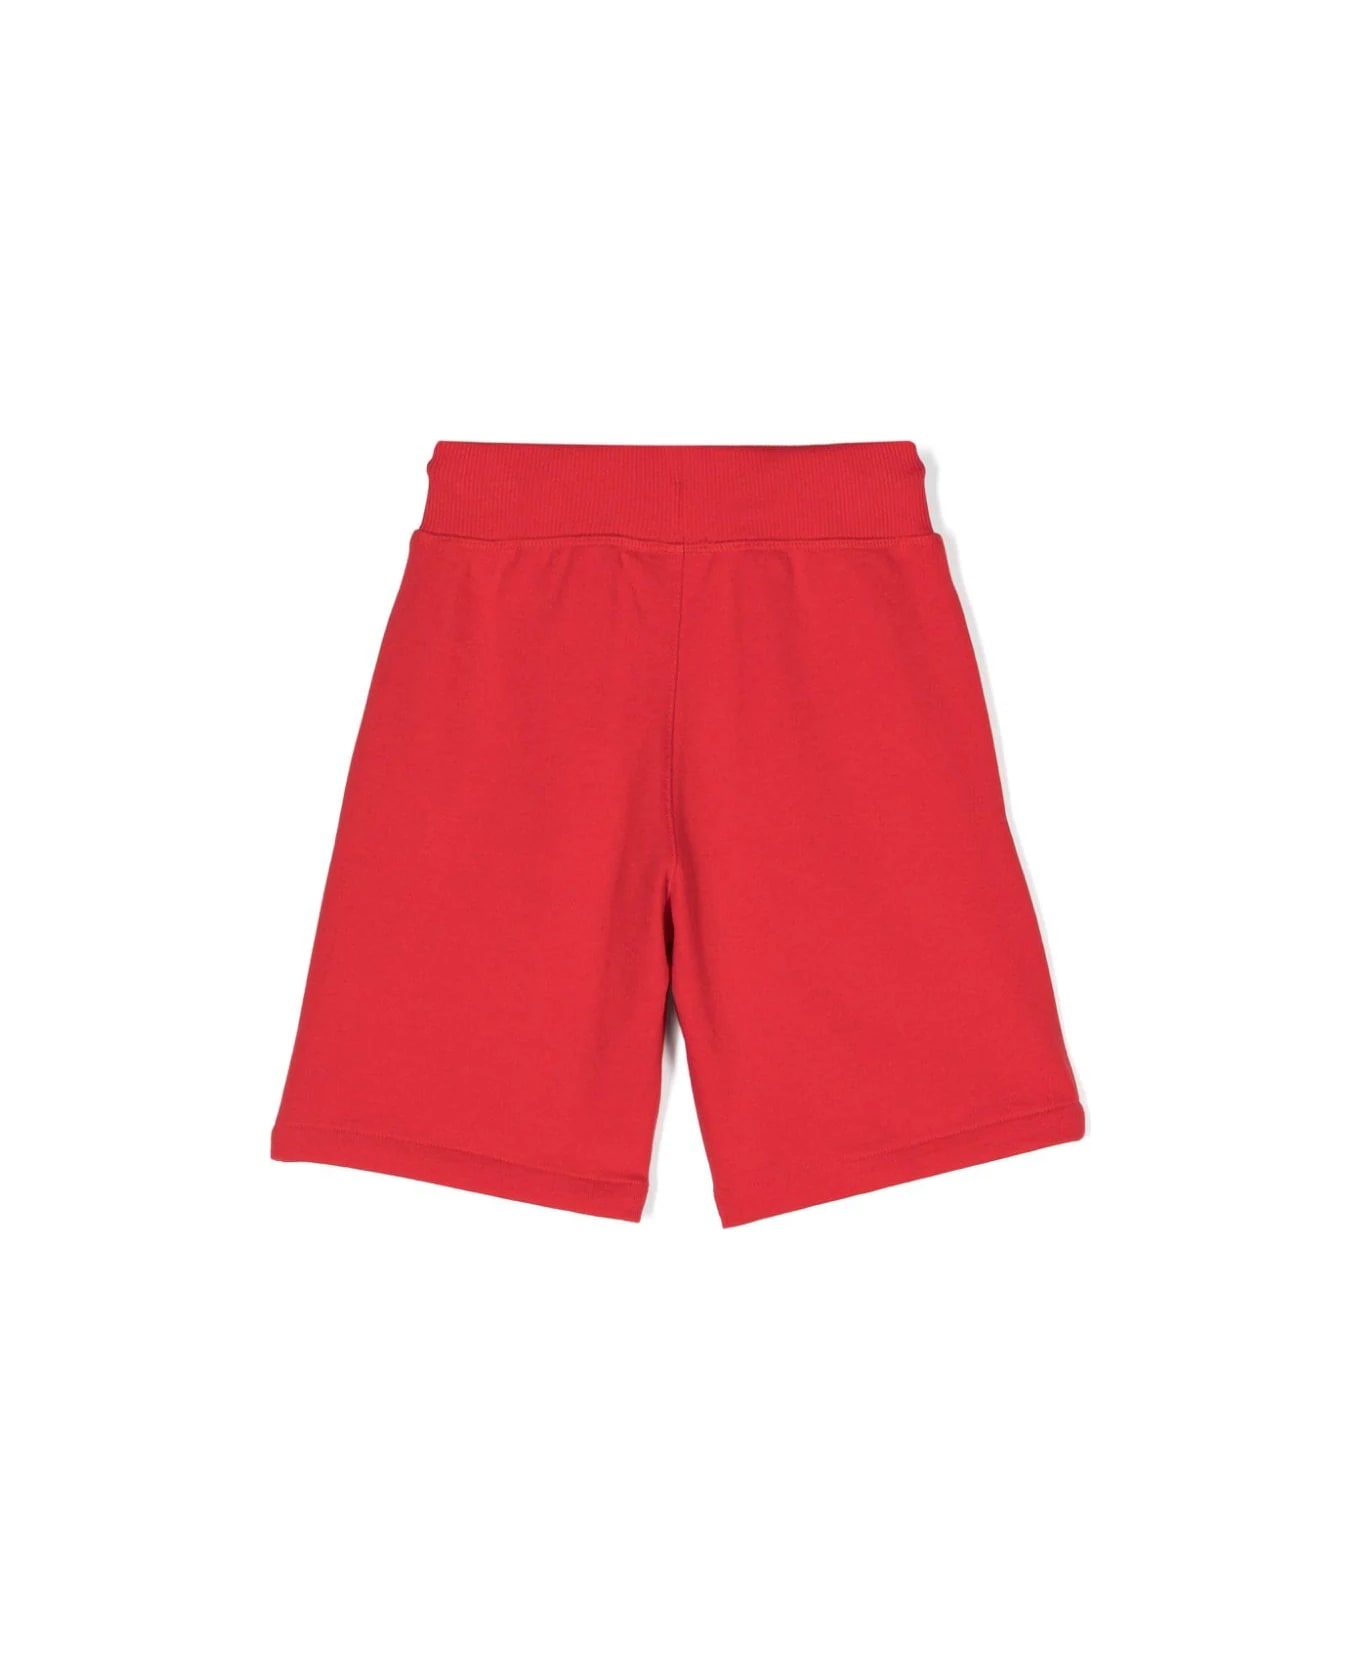 Hugo Boss Sports Shorts With Print - Red ボトムス